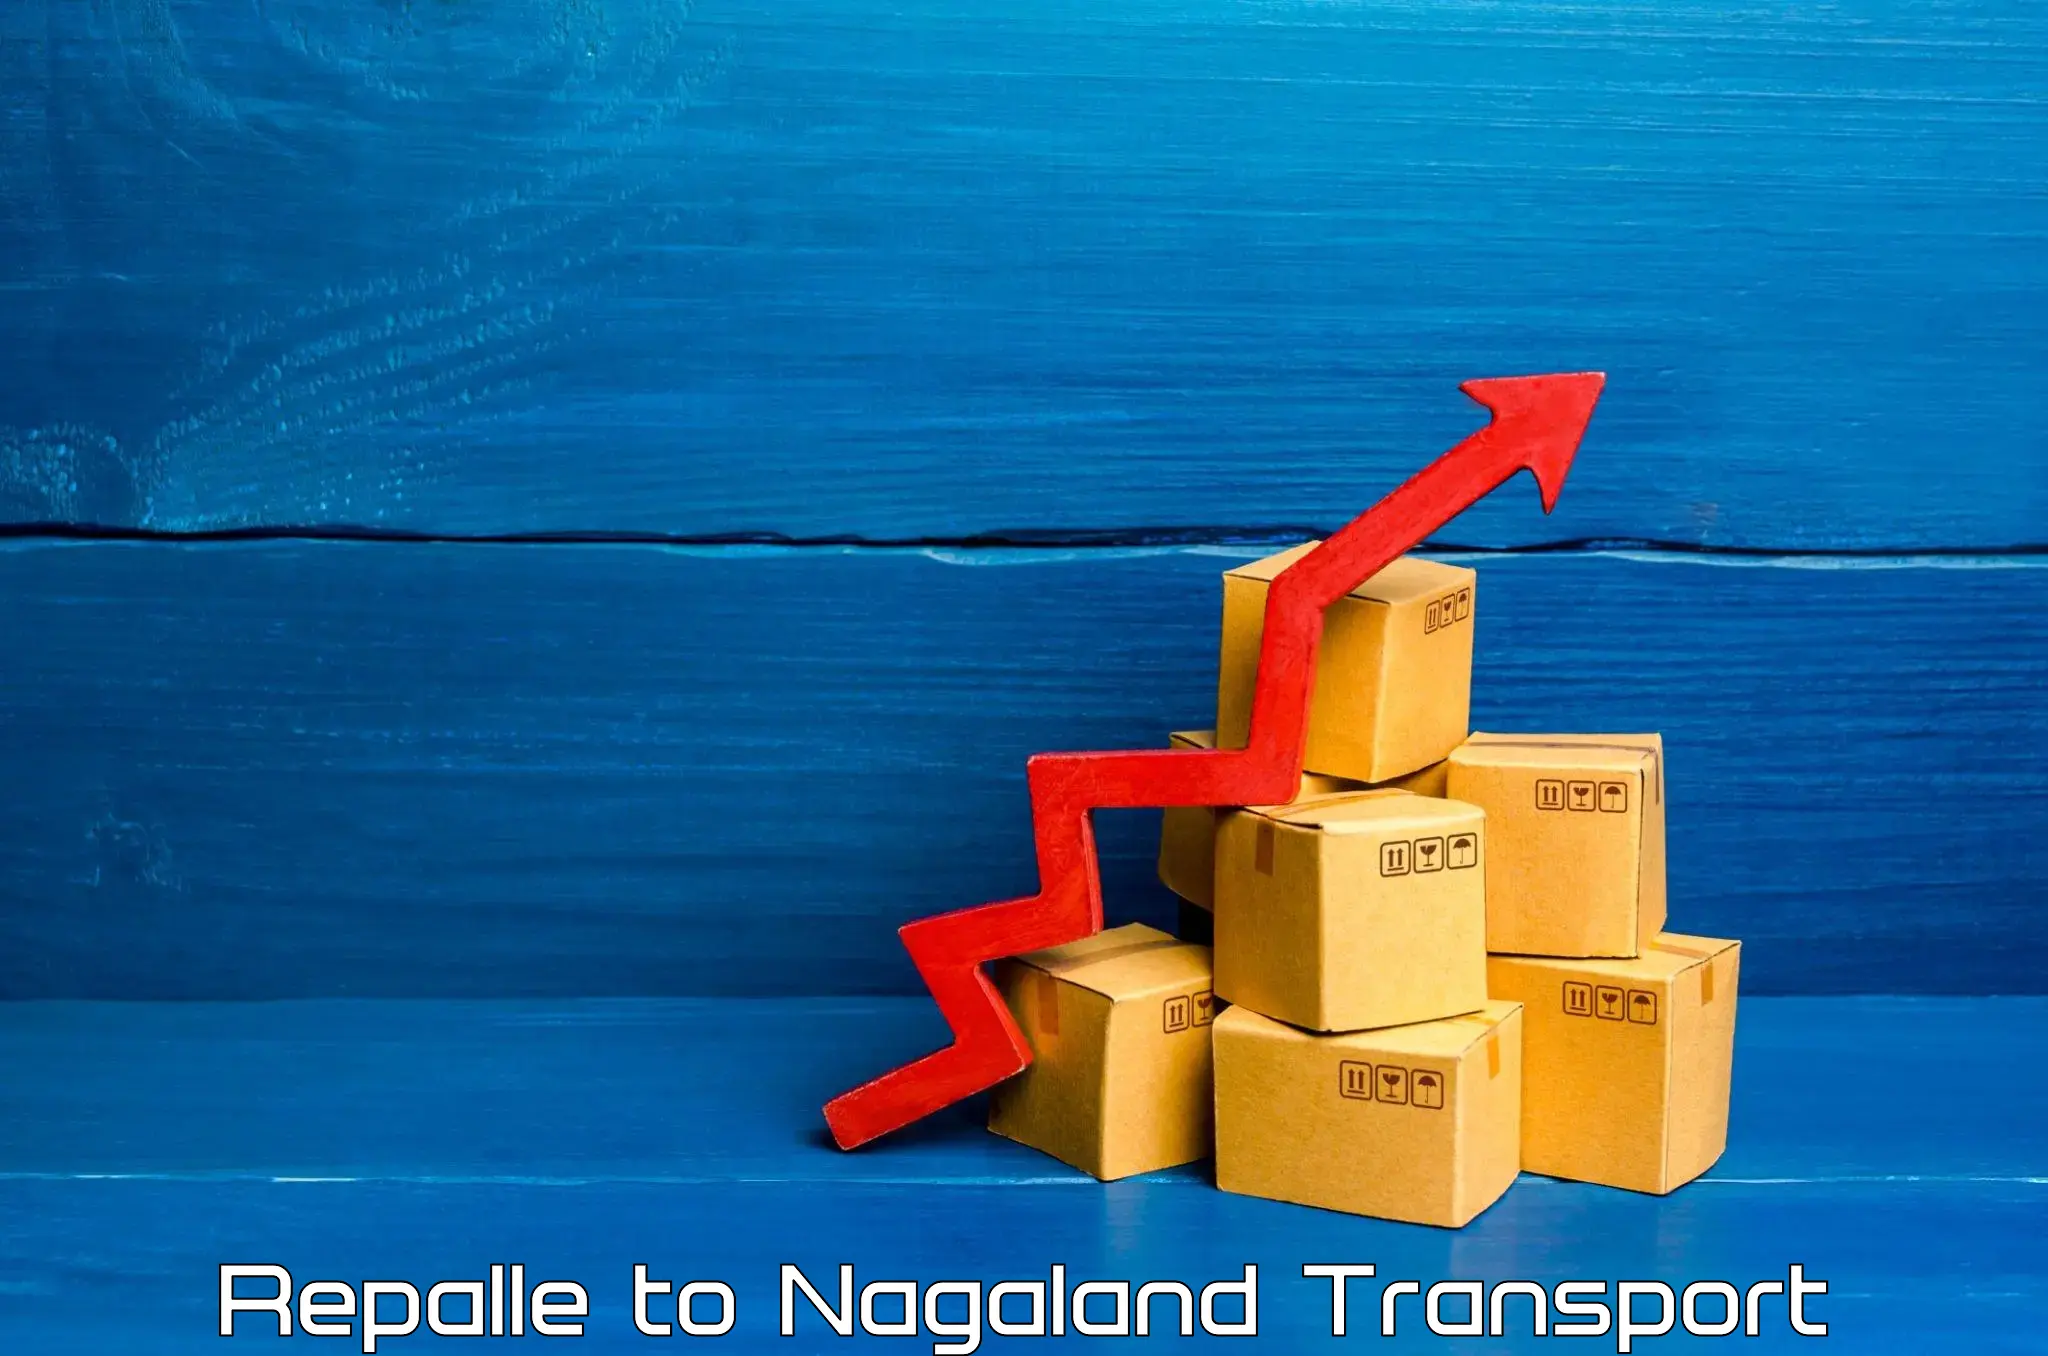 Cycle transportation service Repalle to Nagaland